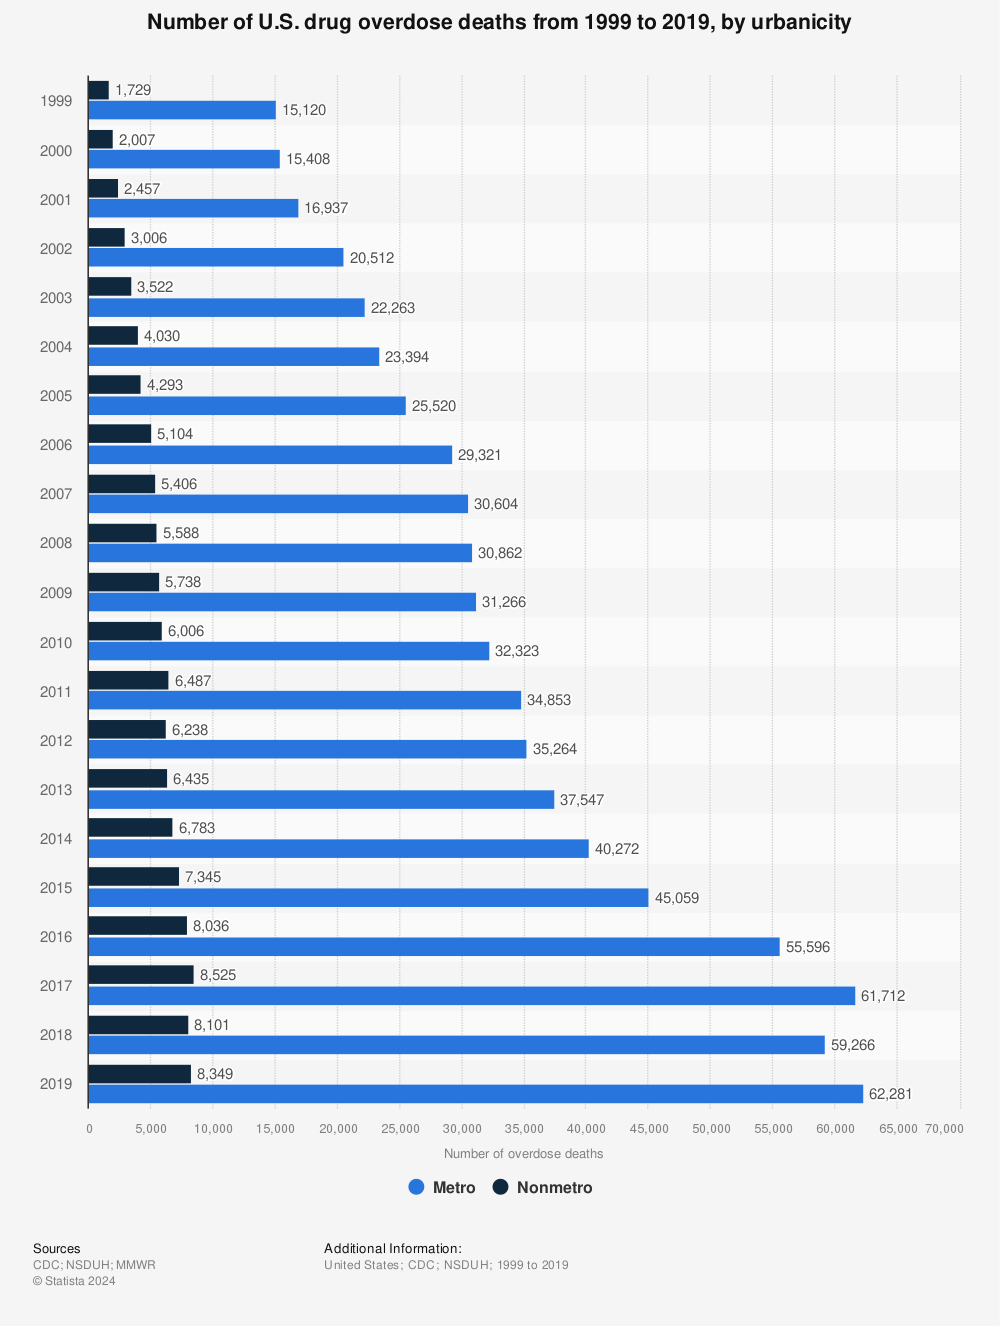 Statistic: Number of U.S. drug overdose deaths from 1999 to 2019, by urbanicity | Statista